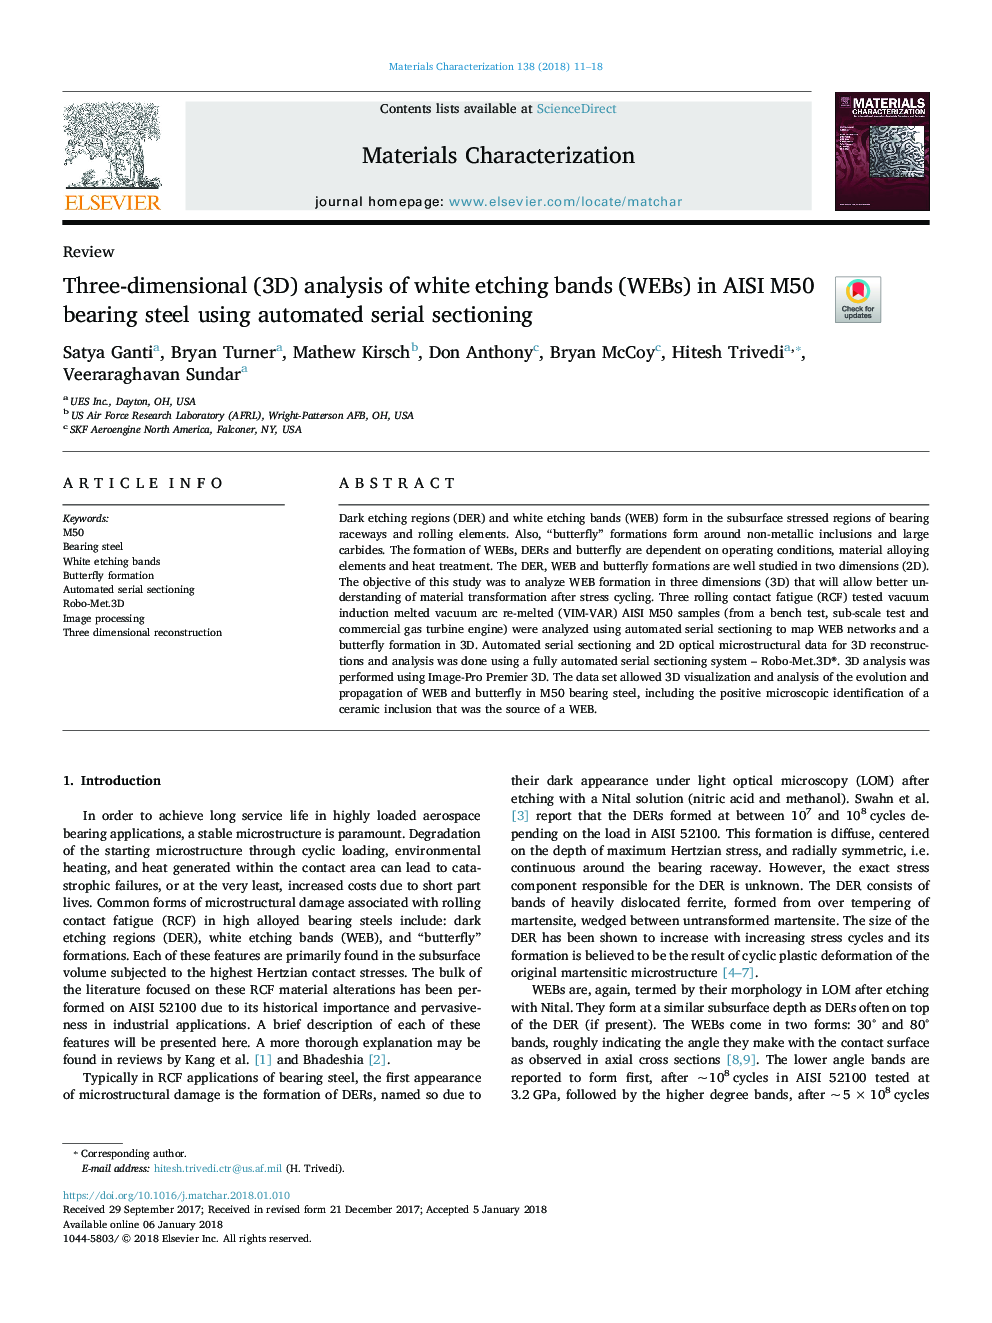 Three-dimensional (3D) analysis of white etching bands (WEBs) in AISI M50 bearing steel using automated serial sectioning